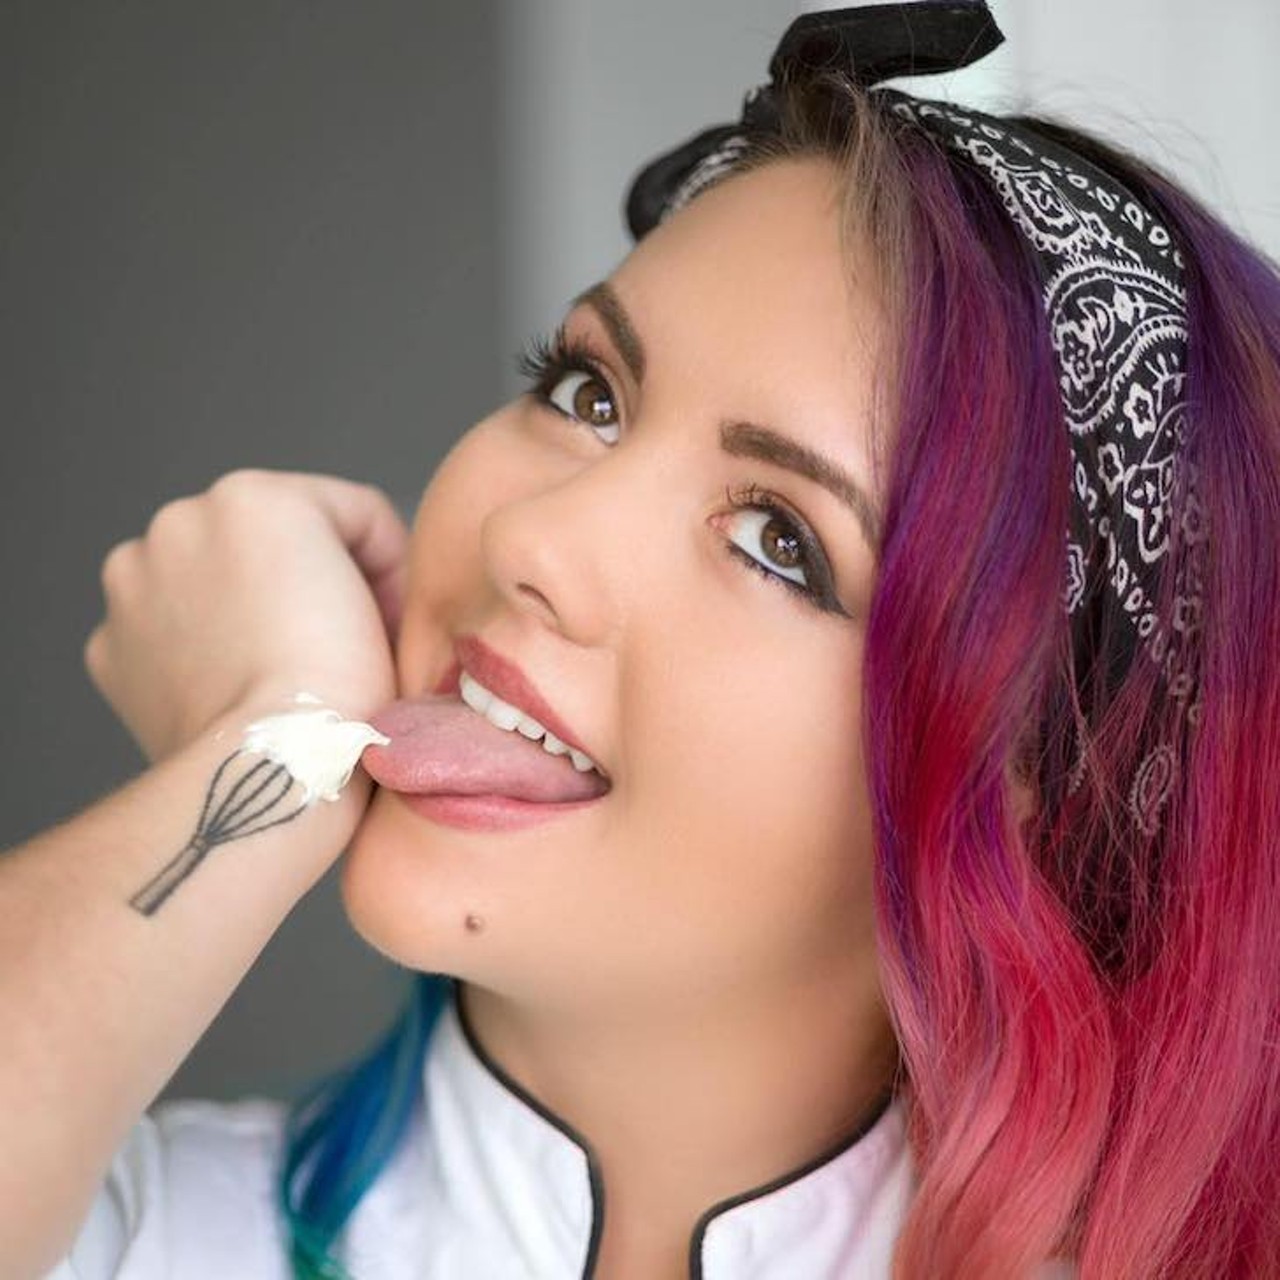 Alicia McCall
You might recognize her as The Girl With The Whisk Tattoo. The baker has made appearances on Datz&#146;s instagram as the local chain&#146;s executive pastry chef, competed on the Netflix series &#147;Sugar Rush&#148; and hosted MTV&#146;s mini-series &#147;Meme Cakes.&#148;
Photo via The Girl With The Whisk Tattoo Facebook